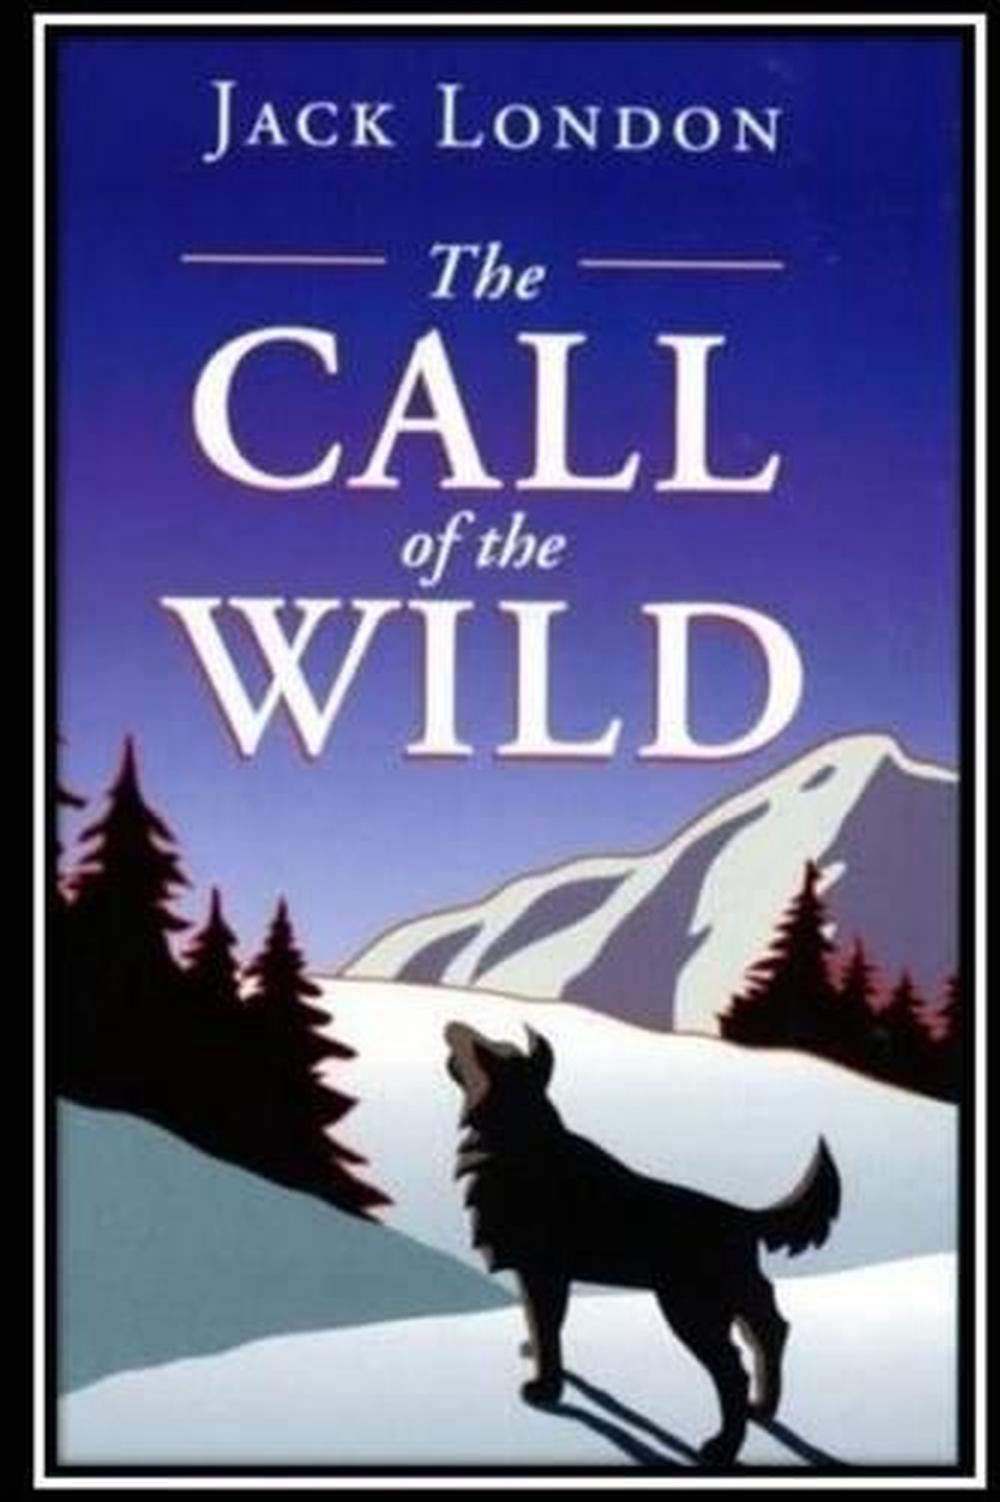 book review of call of the wild